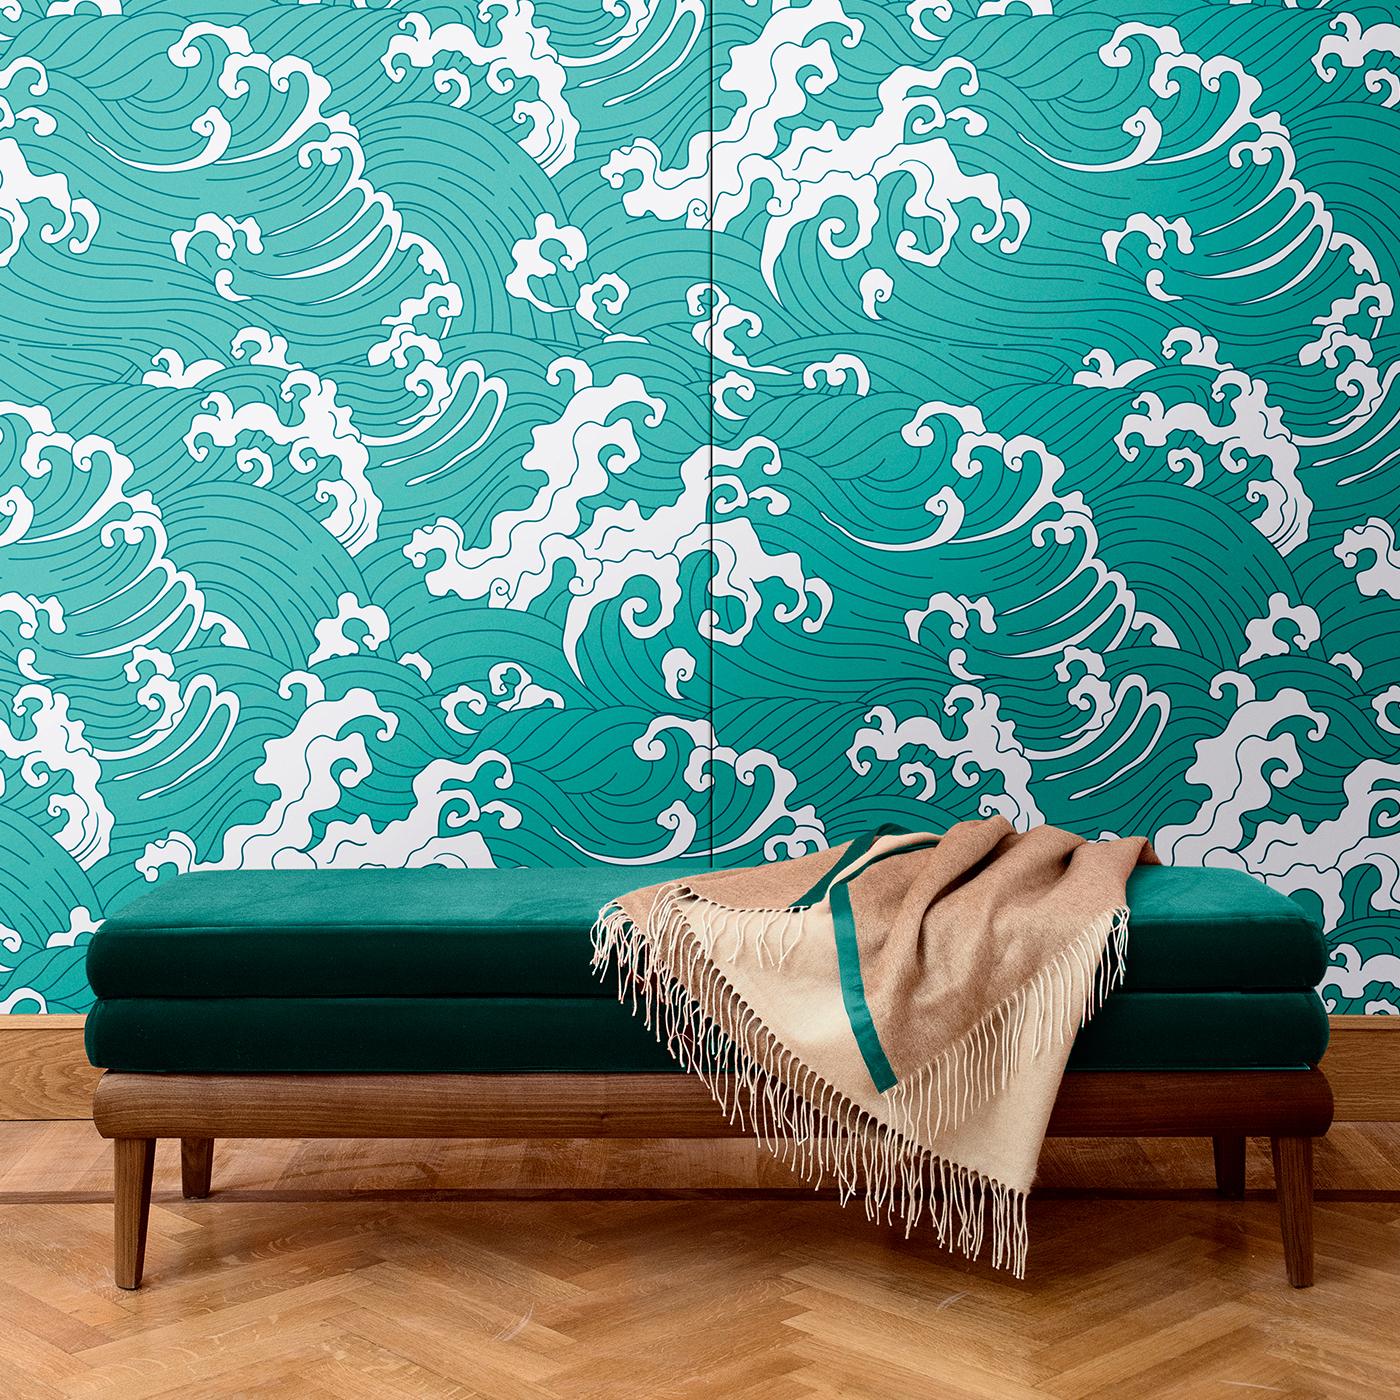 Inspired by the sophisticated elegance of traditional Japanese art, the design of this decoration will add a timeless accent to a whole room or a single wall. Part of the Waves collection, this wall covering uses white and turquoise as colors,